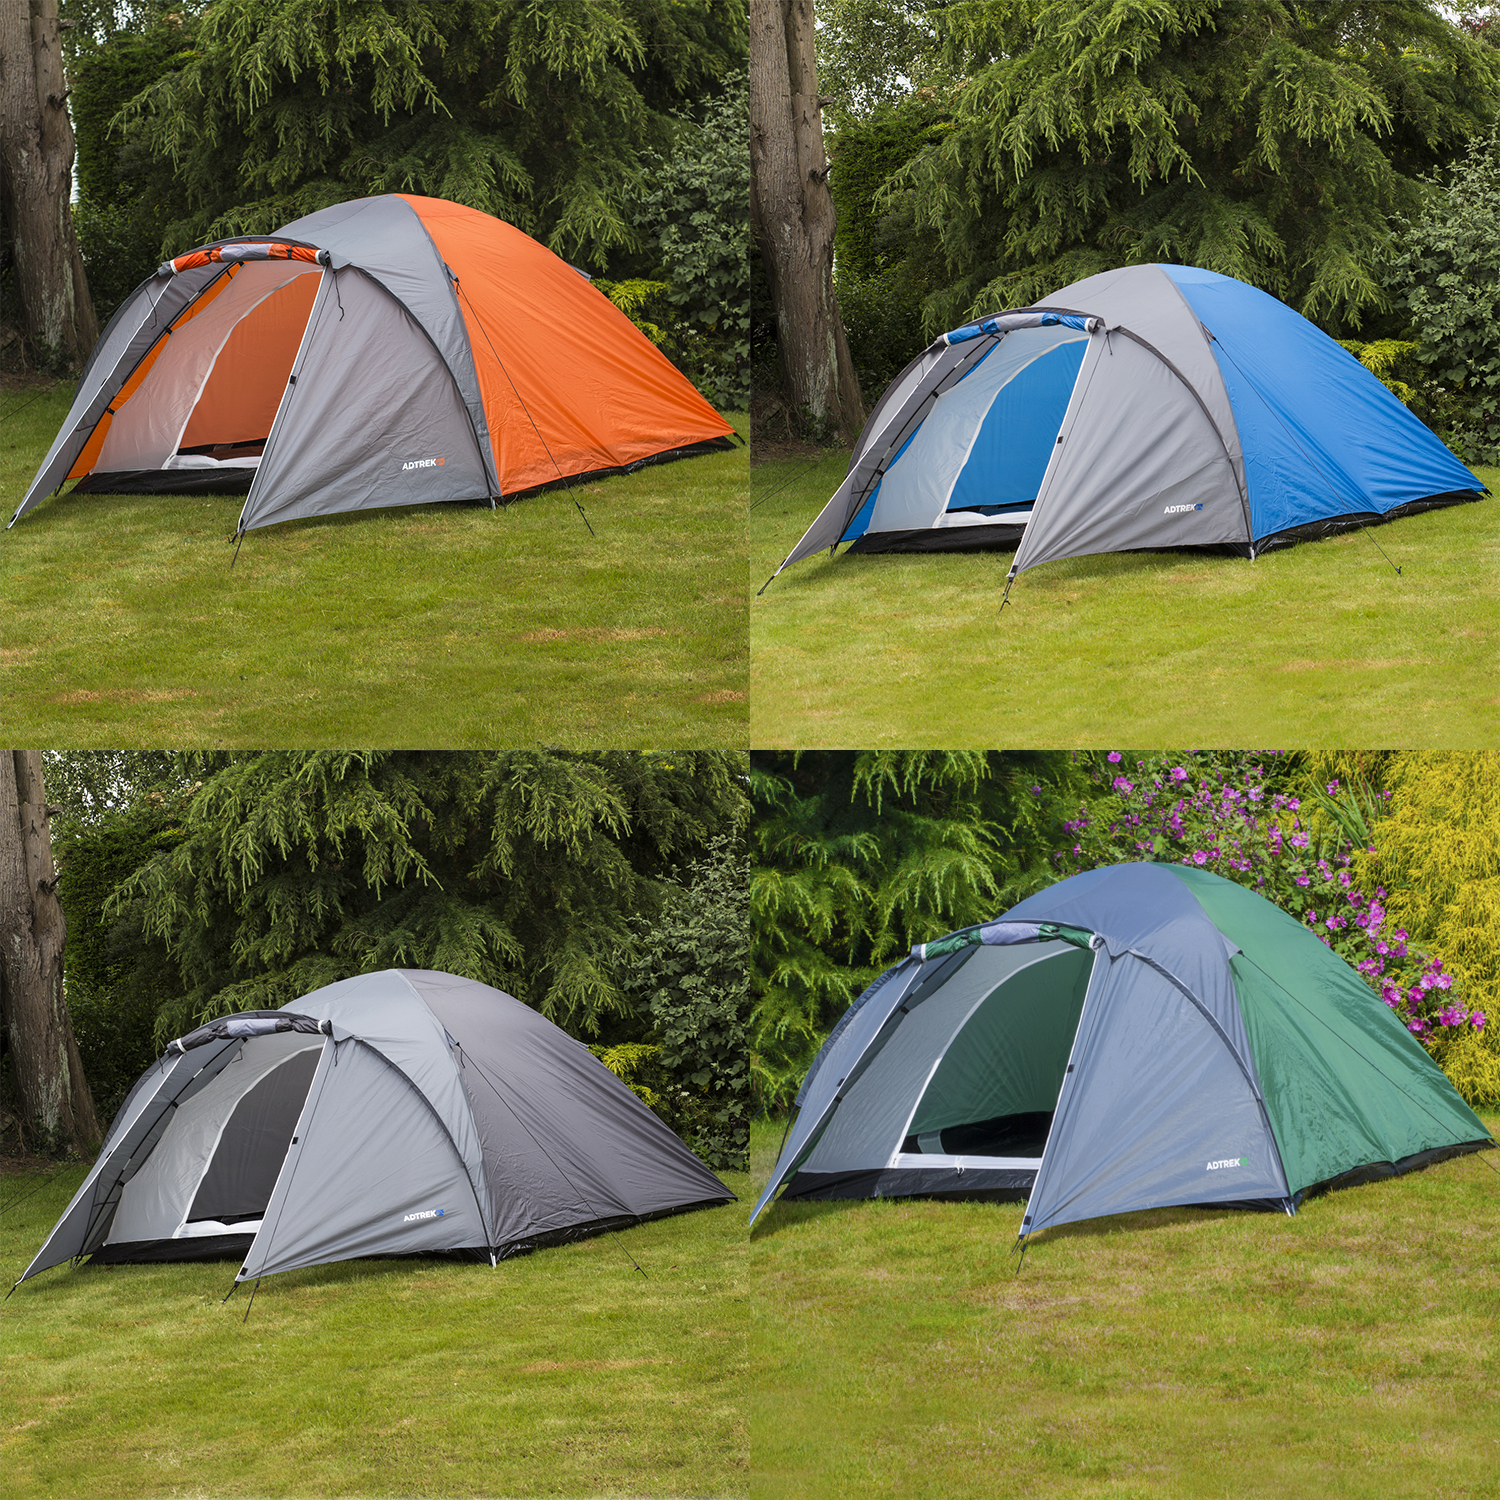 Adtrek 4 Person Tent | Tents & Awnings | Outdoor Value